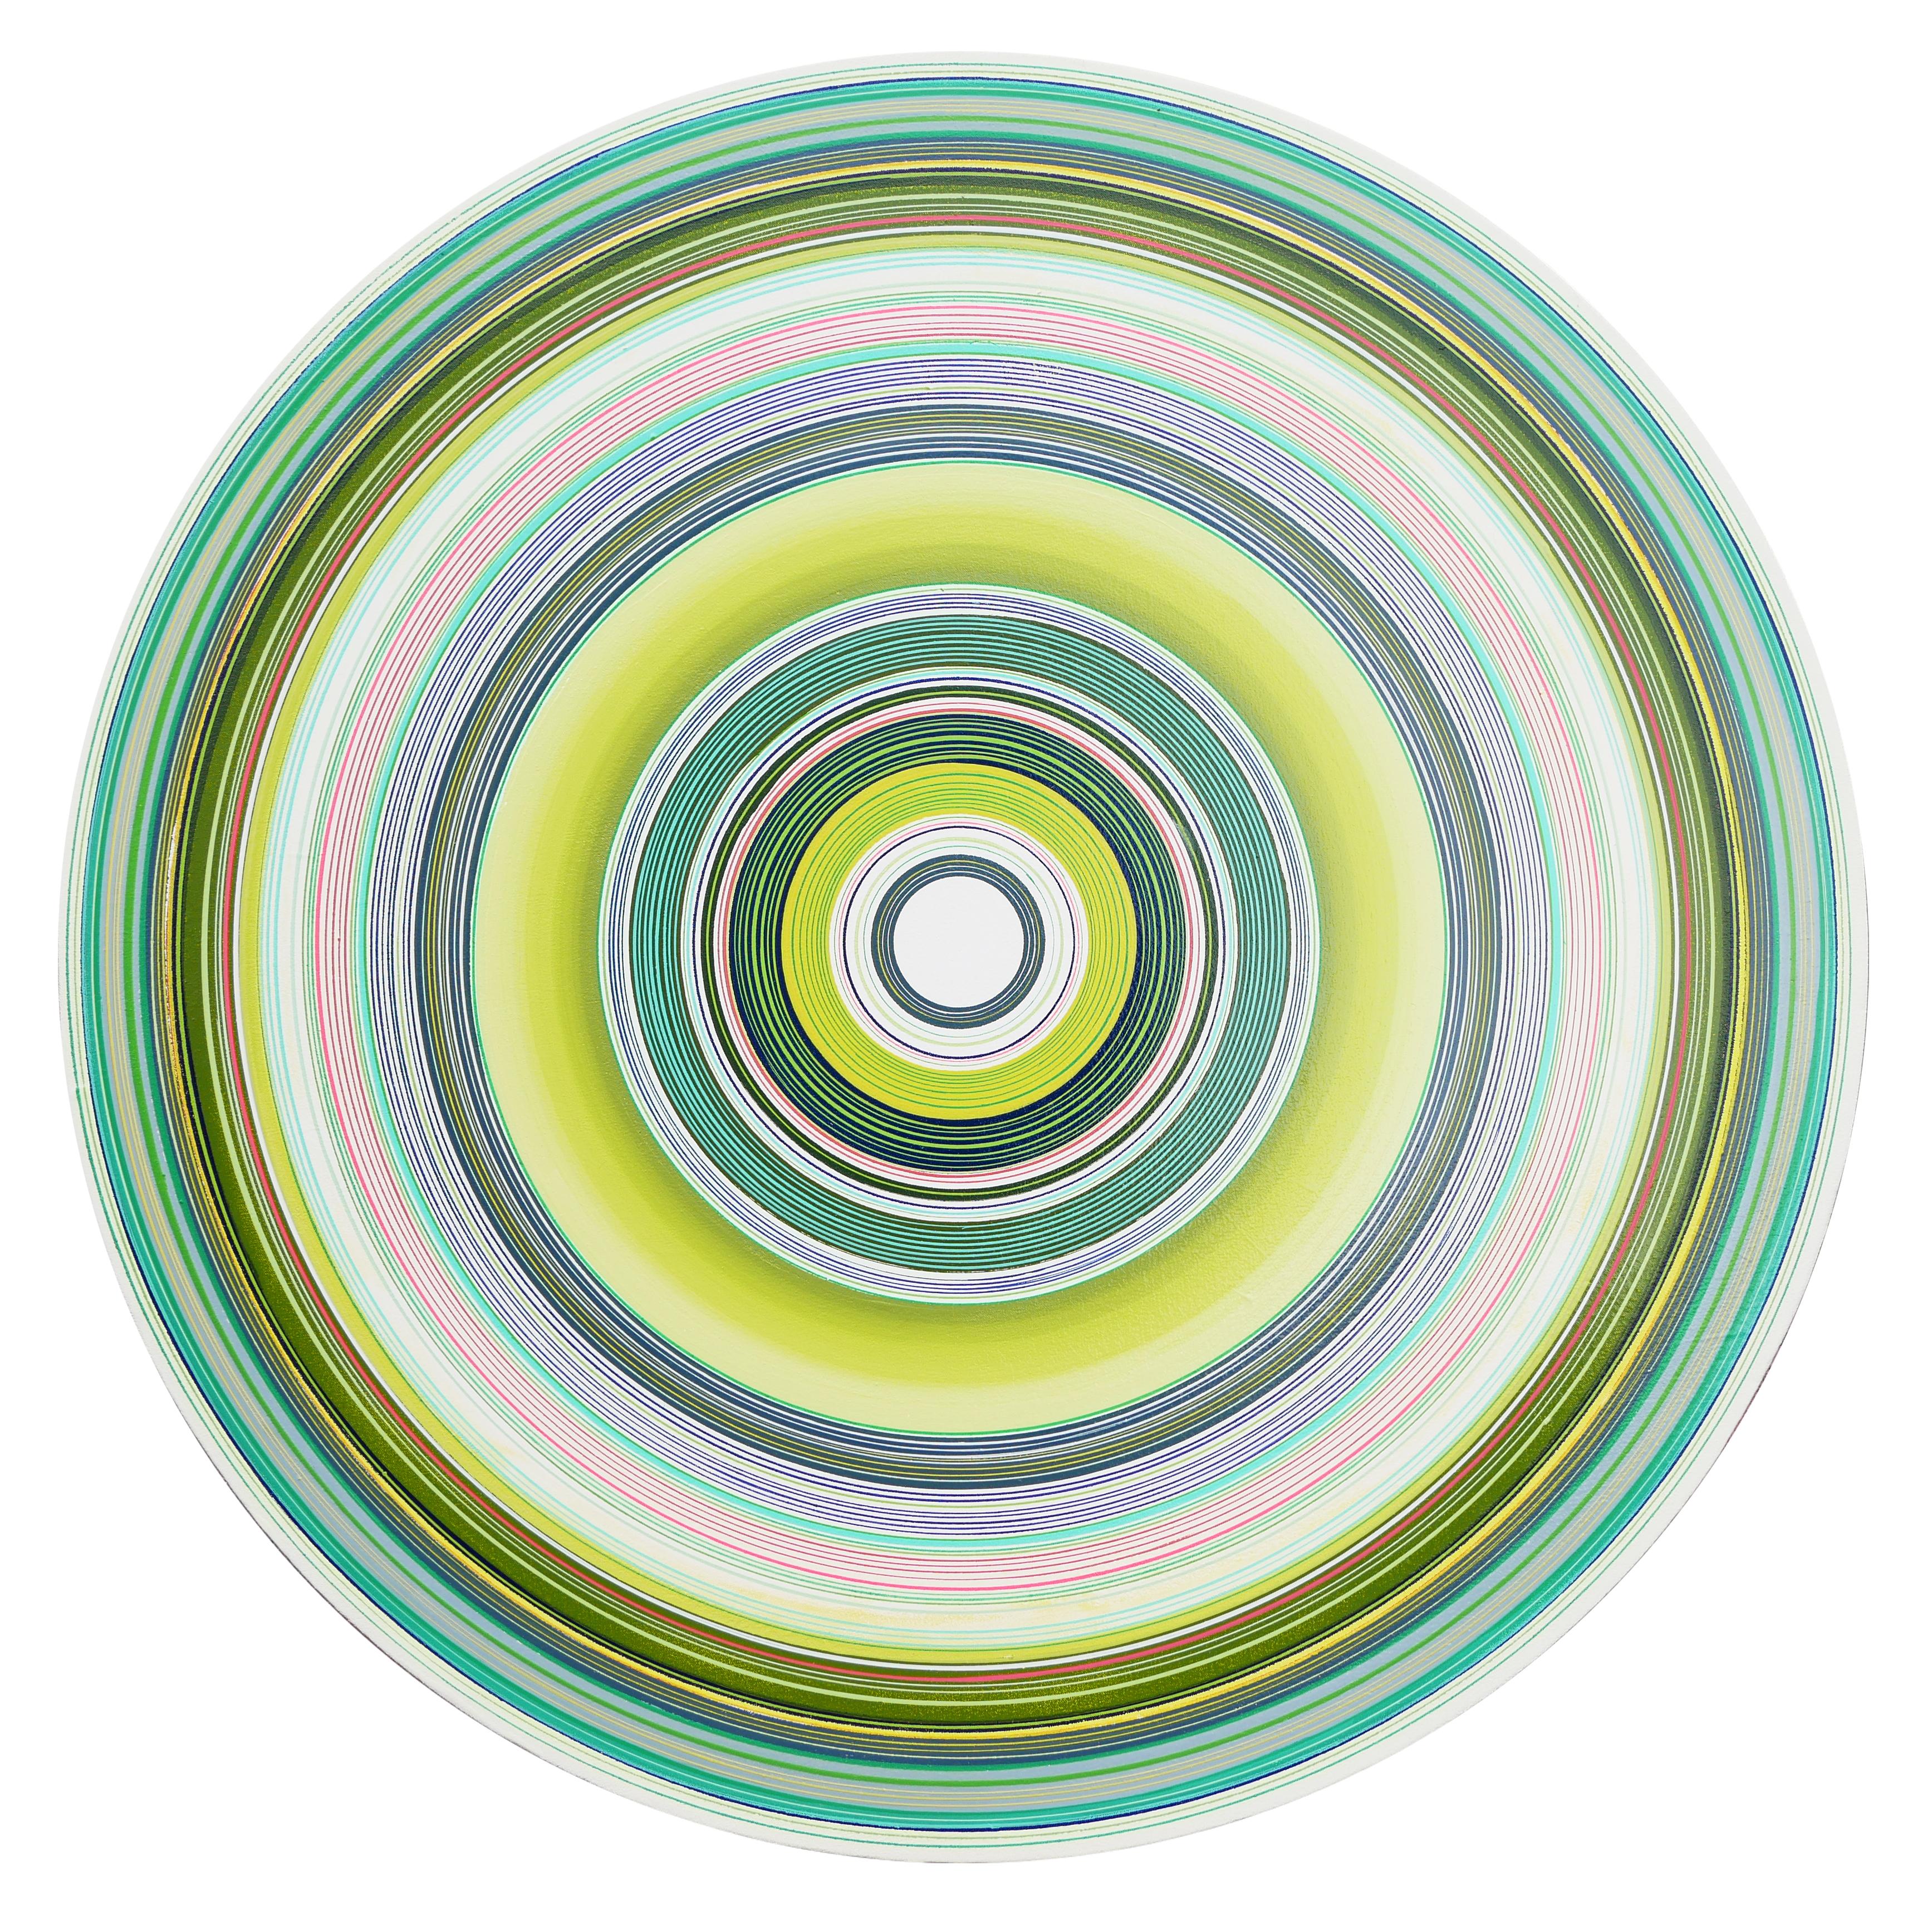 David Hardaker Abstract Painting - "Harmonic Generator" Green Toned Circular Painting with Gold Accent Lining